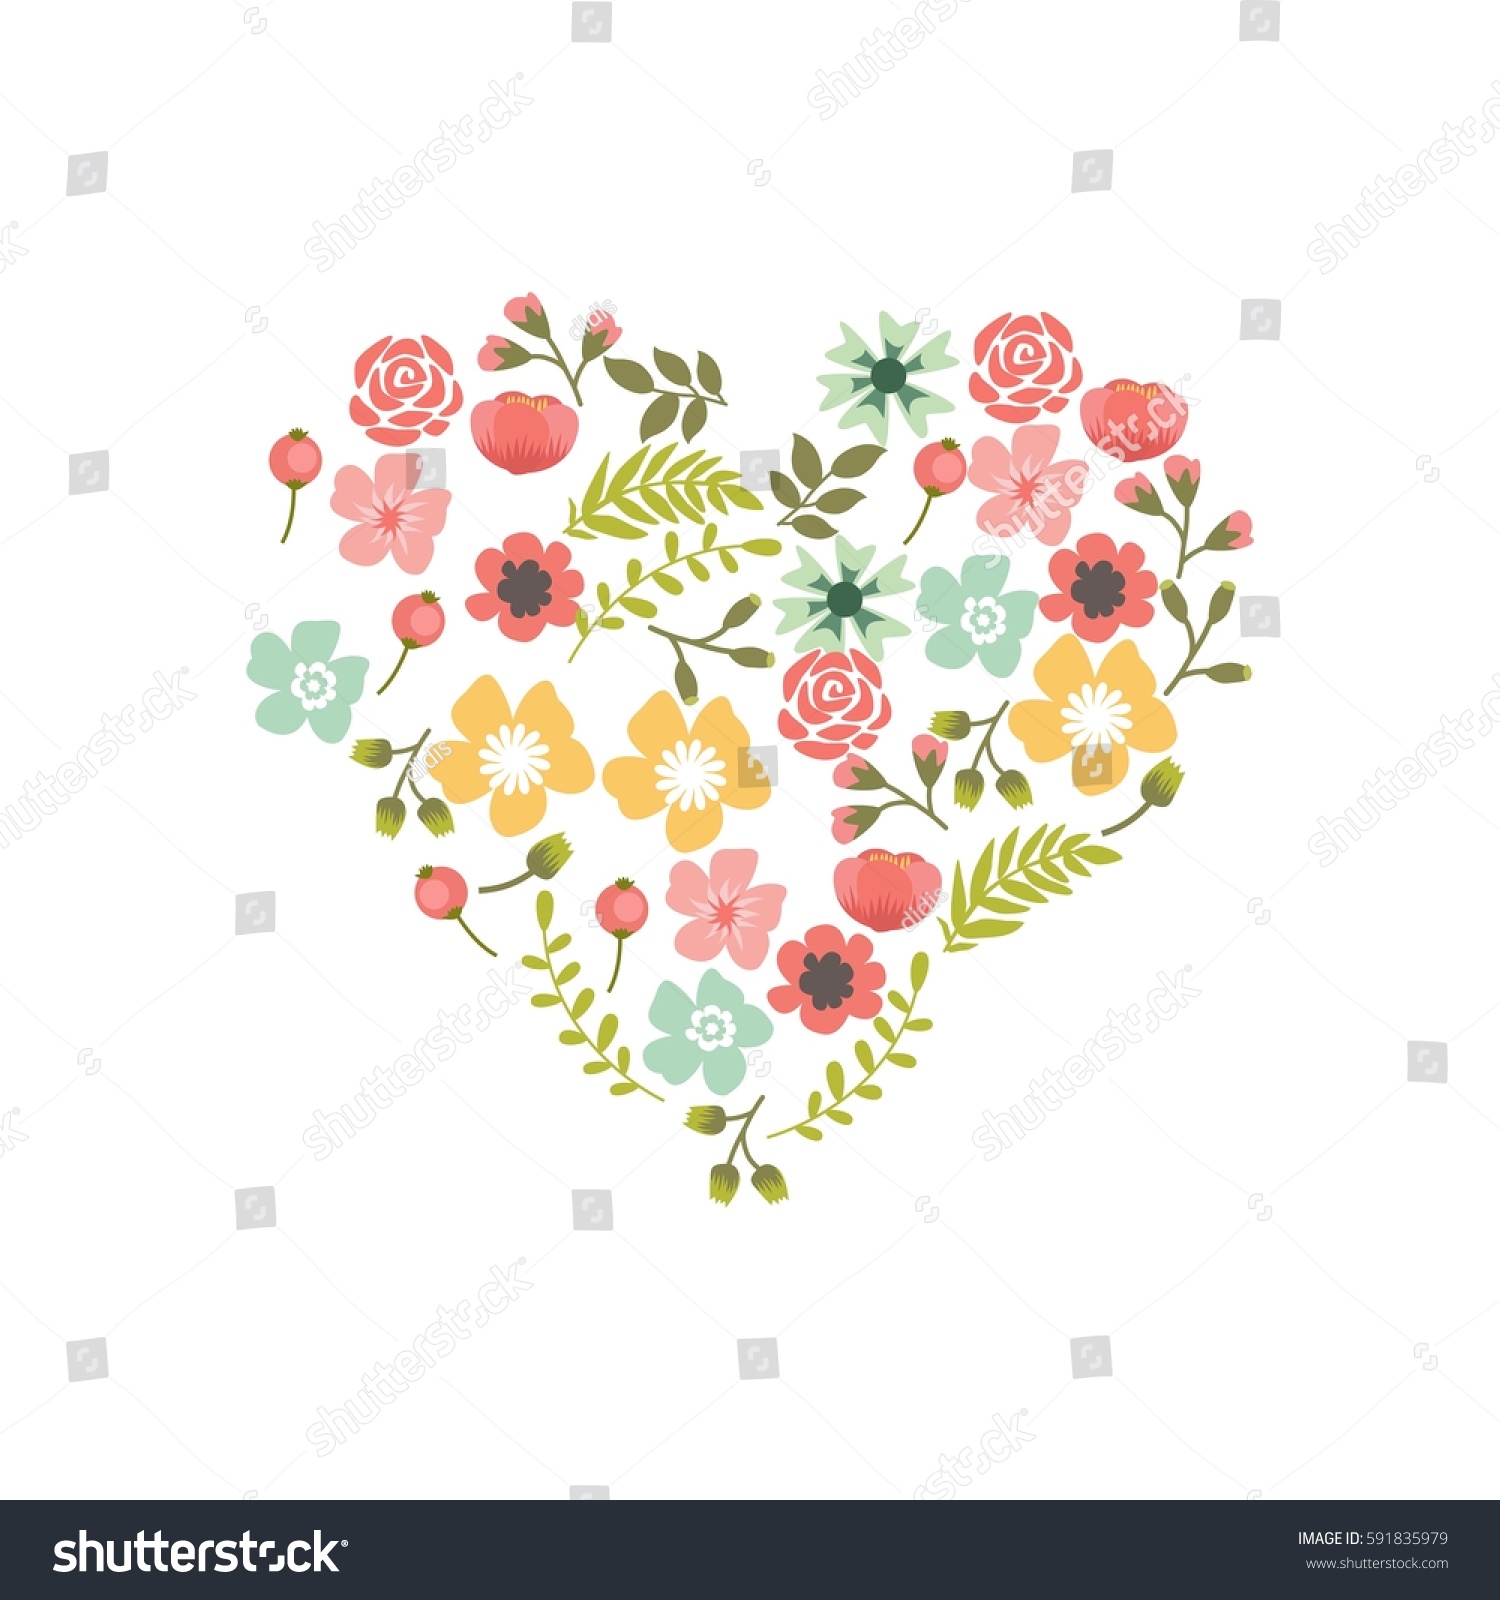 Cute Romantic Floral Wreath Design Floral Stock Vector (Royalty Free ...